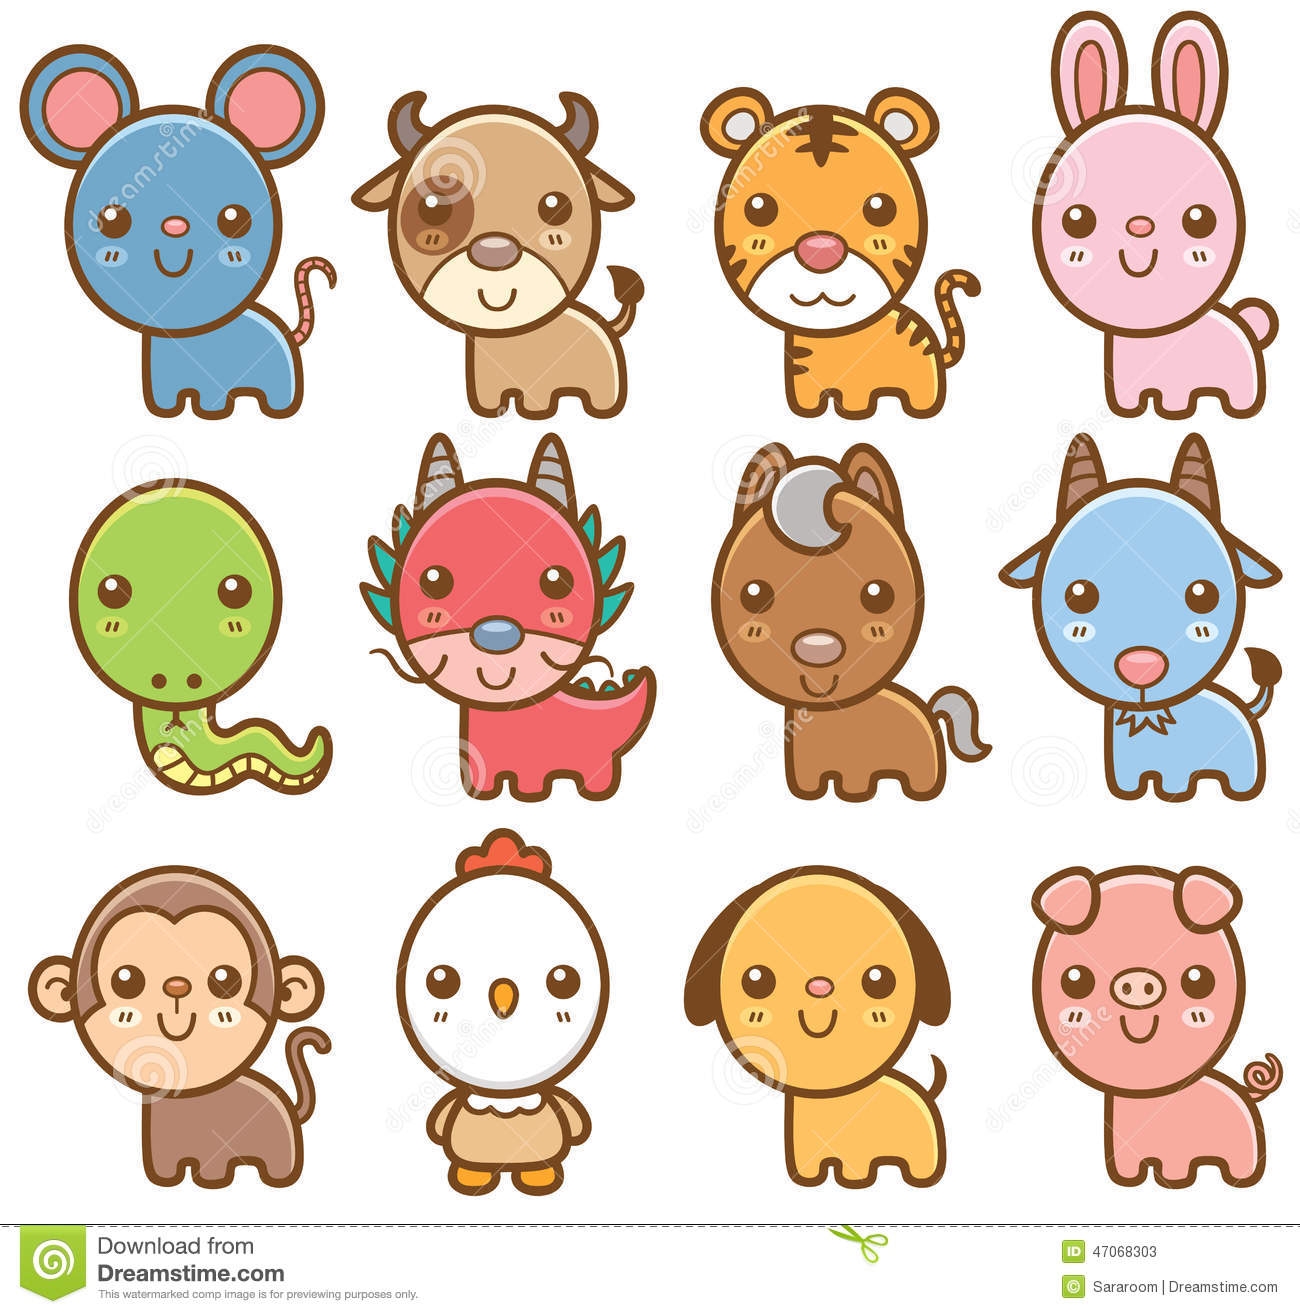 clipart of zodiac signs - photo #40